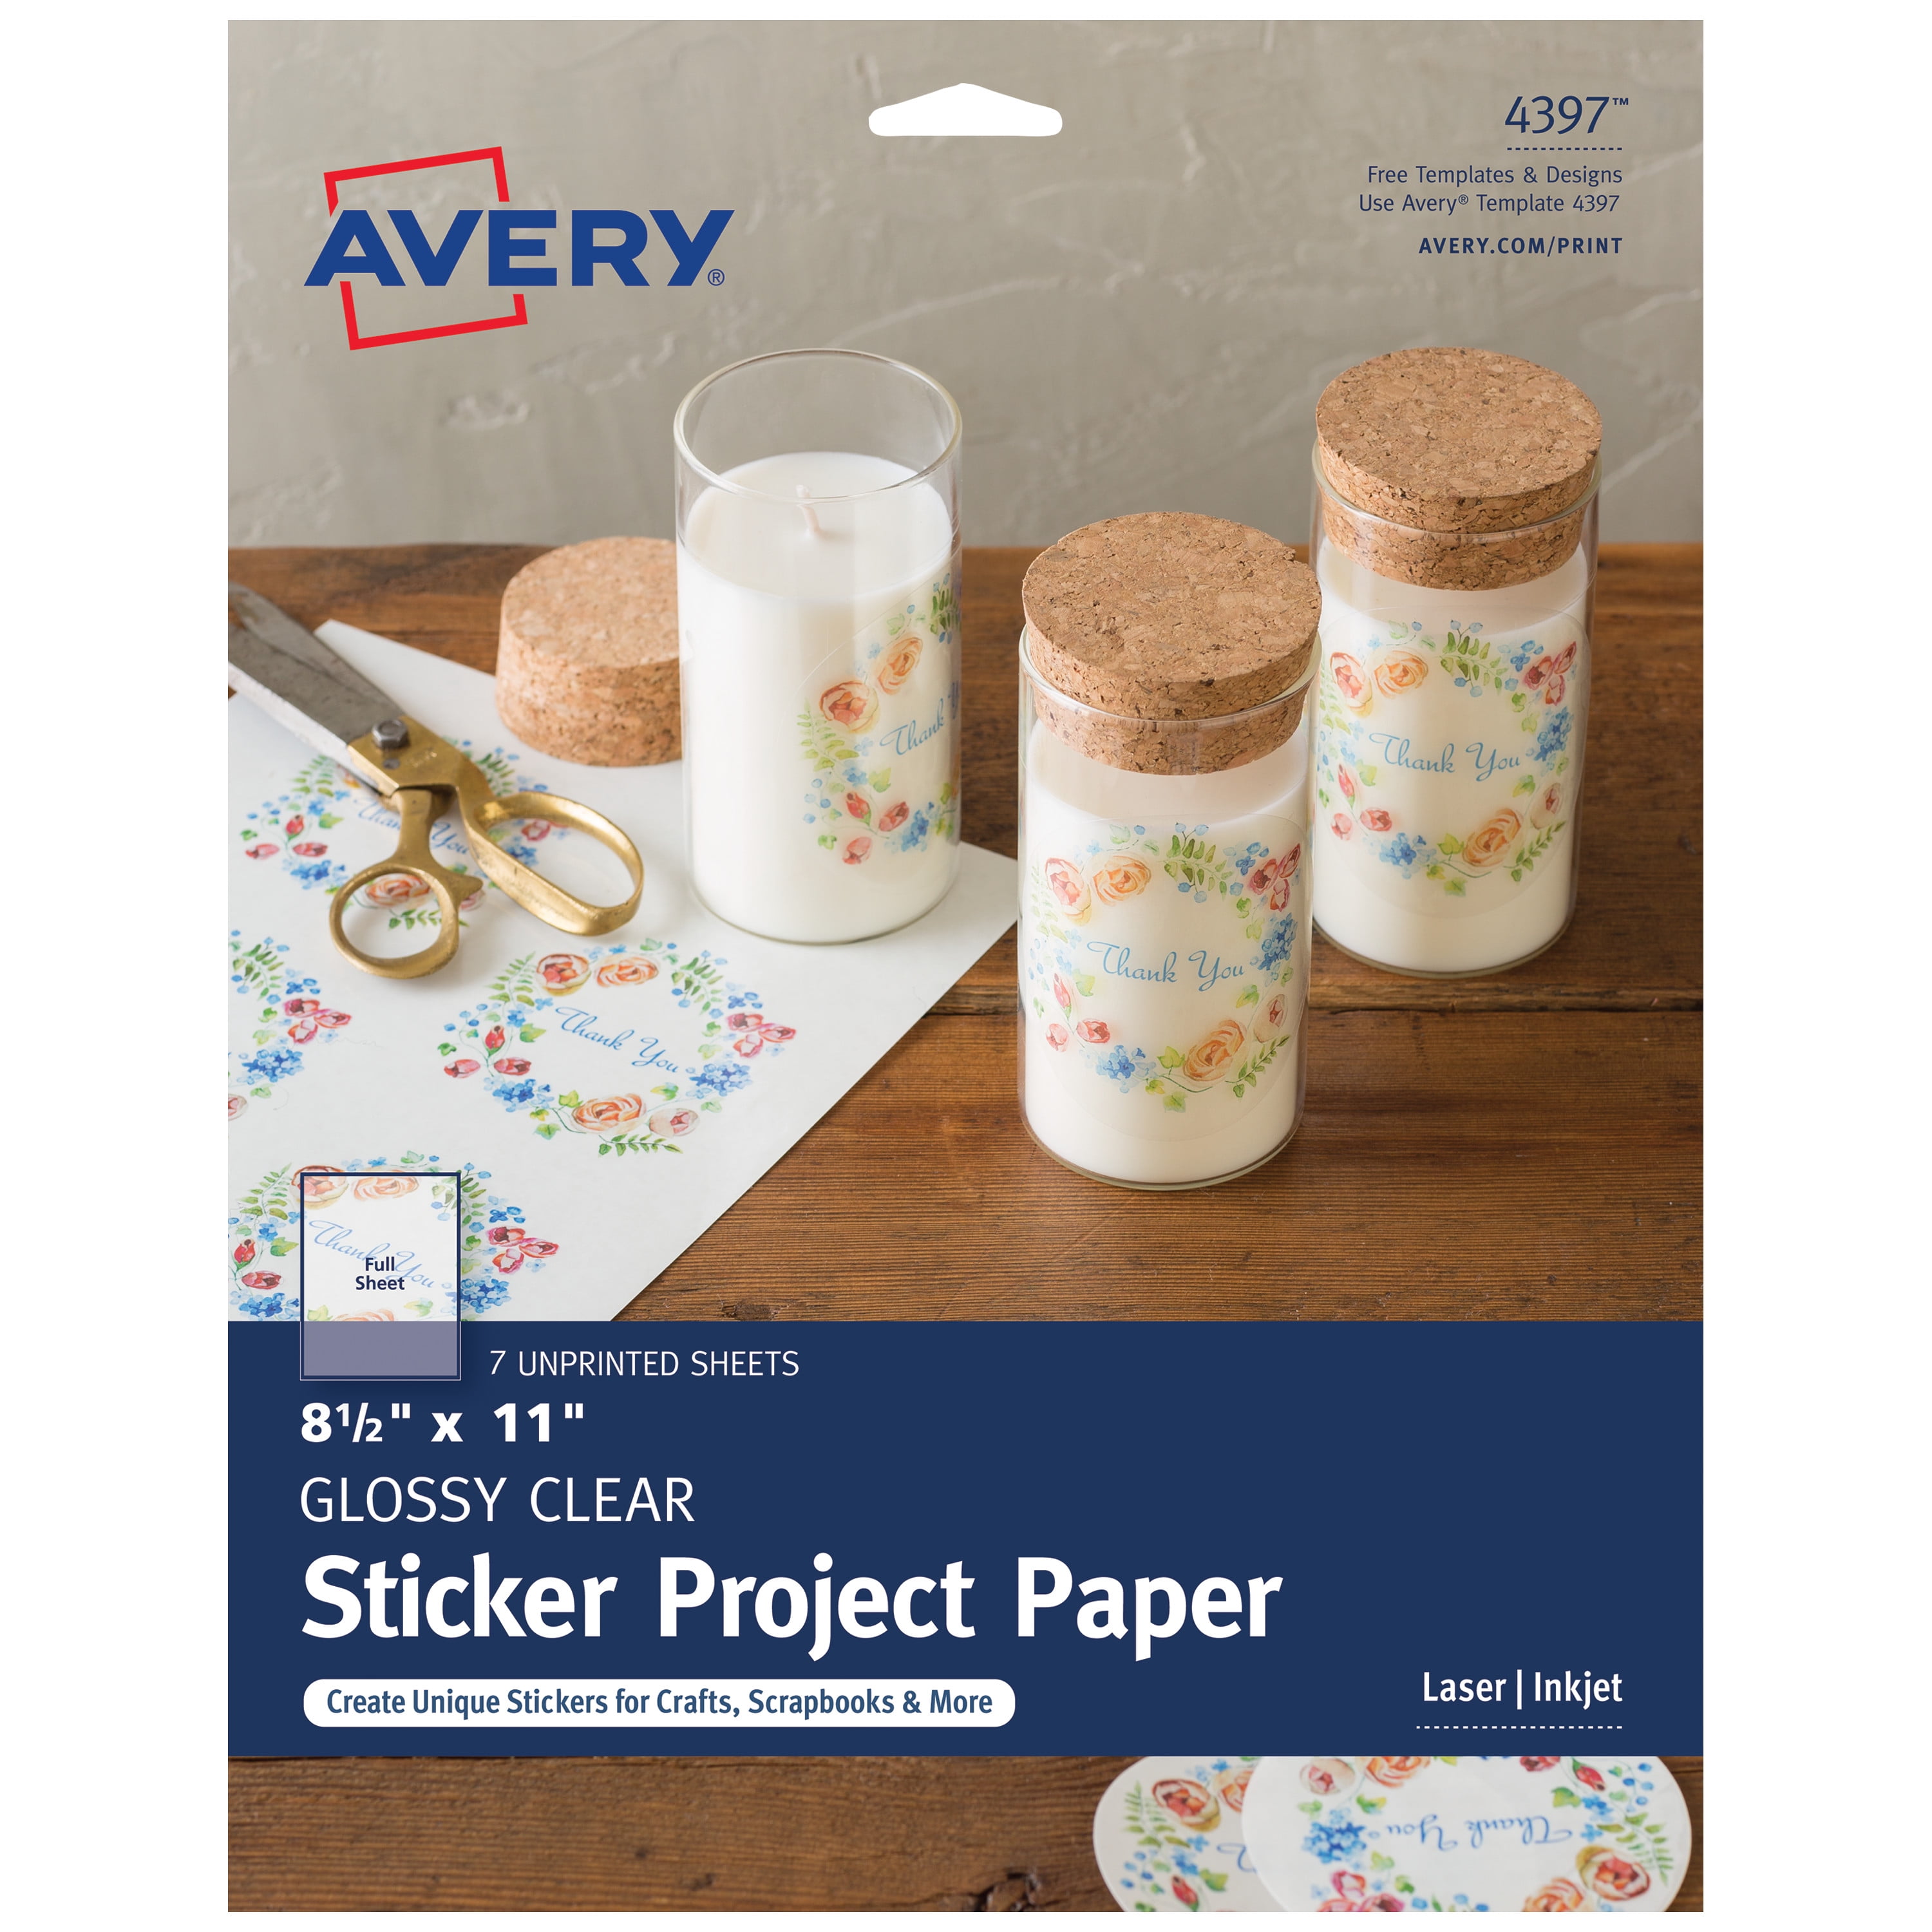 Avery Printable Sticker Paper, Glossy Clear, 7 Sheets (4397) Walmart